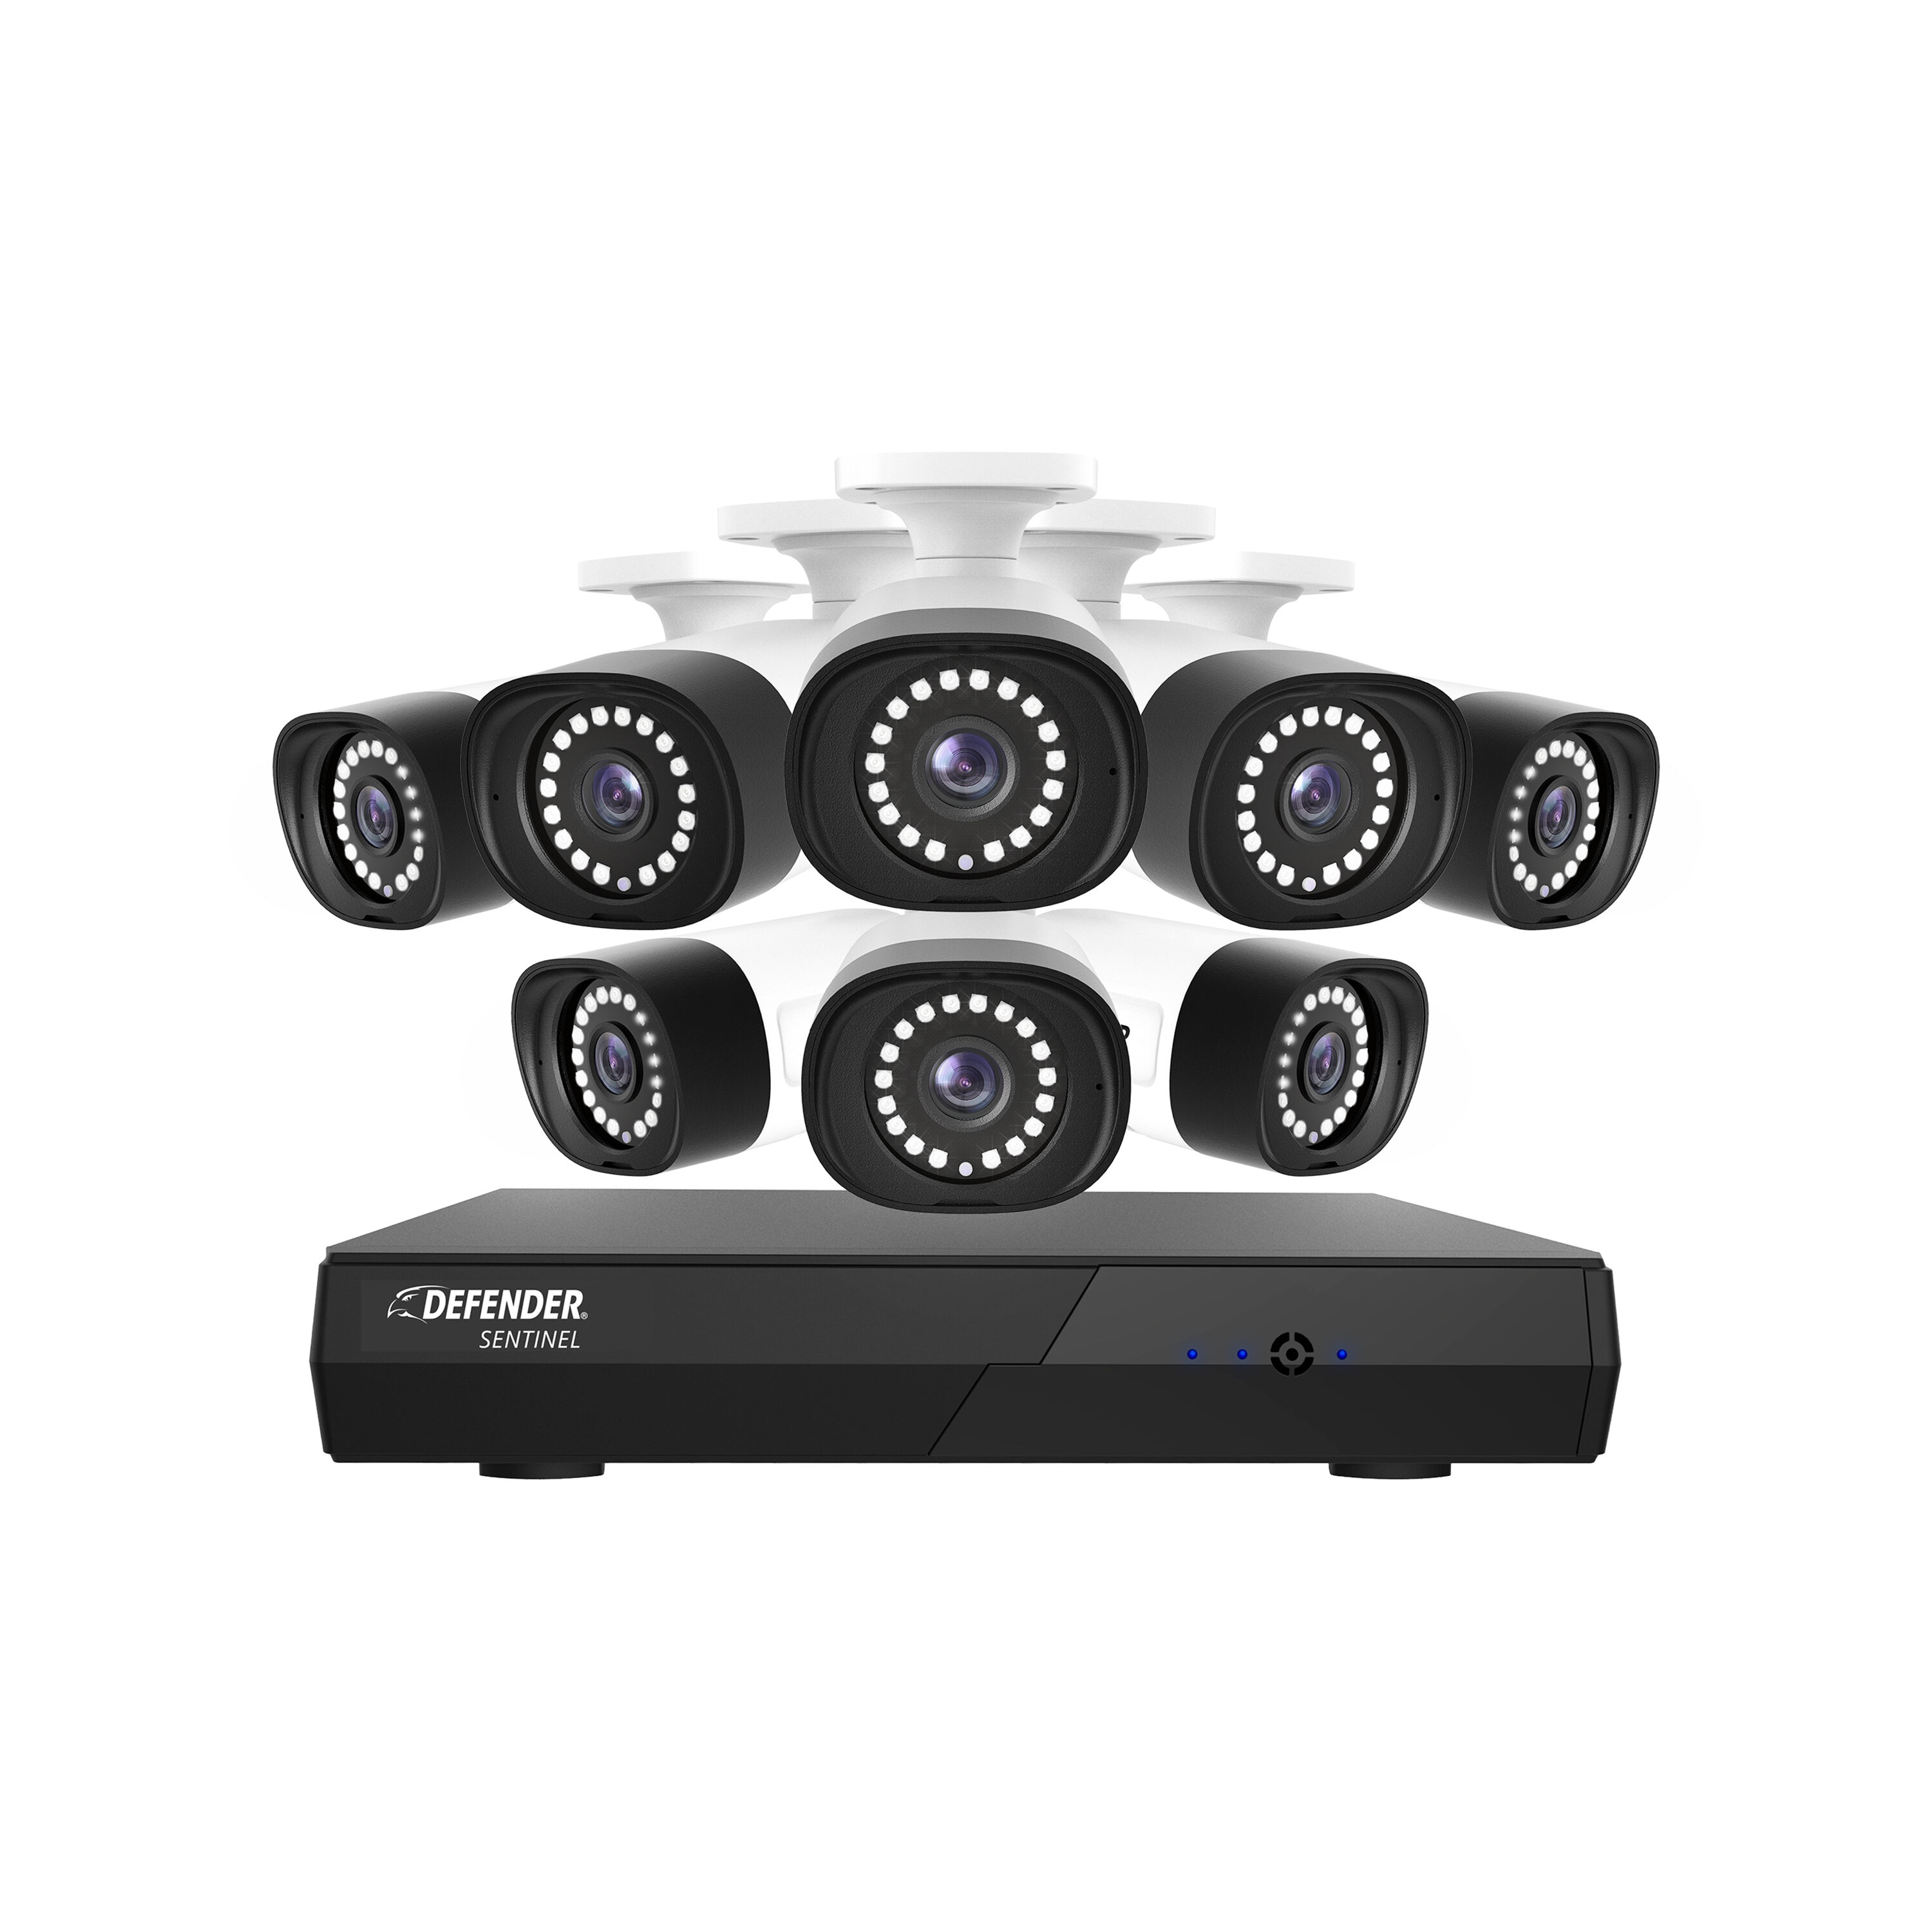 Introducing a new standard of security cameras, our security image